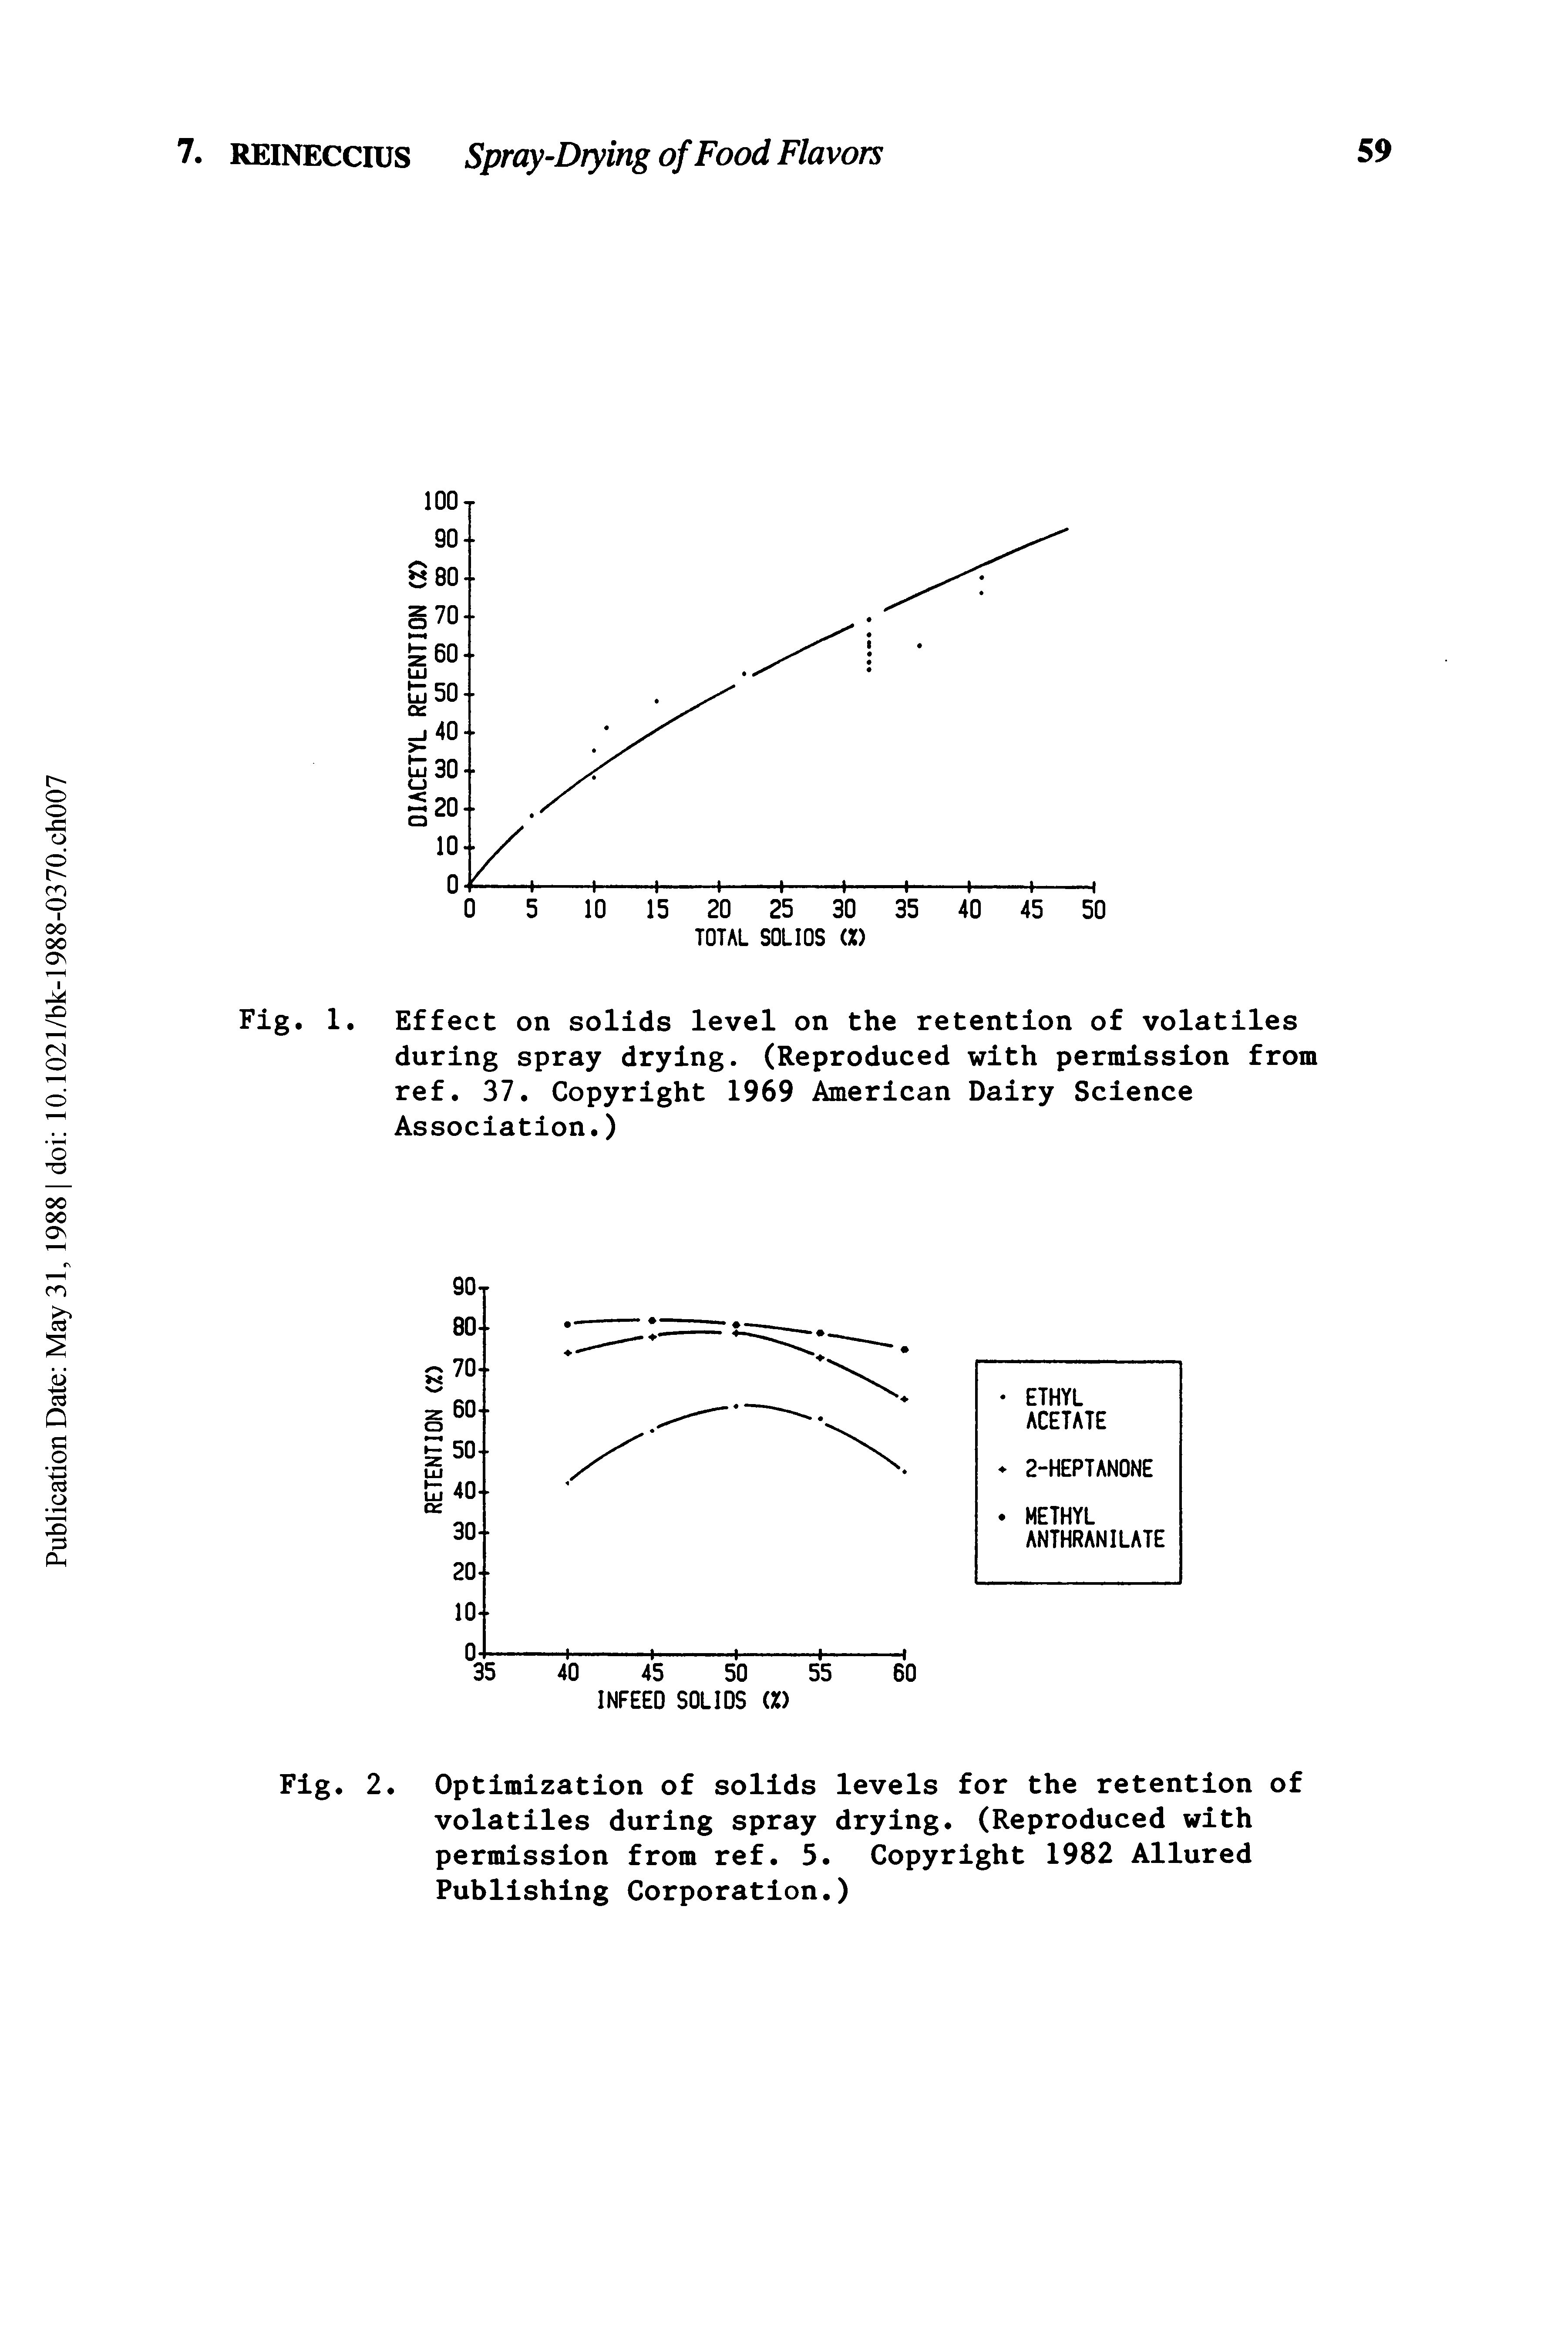 Fig. 1. Effect on solids level on the retention of volatiles during spray drying. (Reproduced with permission from ref. 37. Copyright 1969 American Dairy Science Association.)...